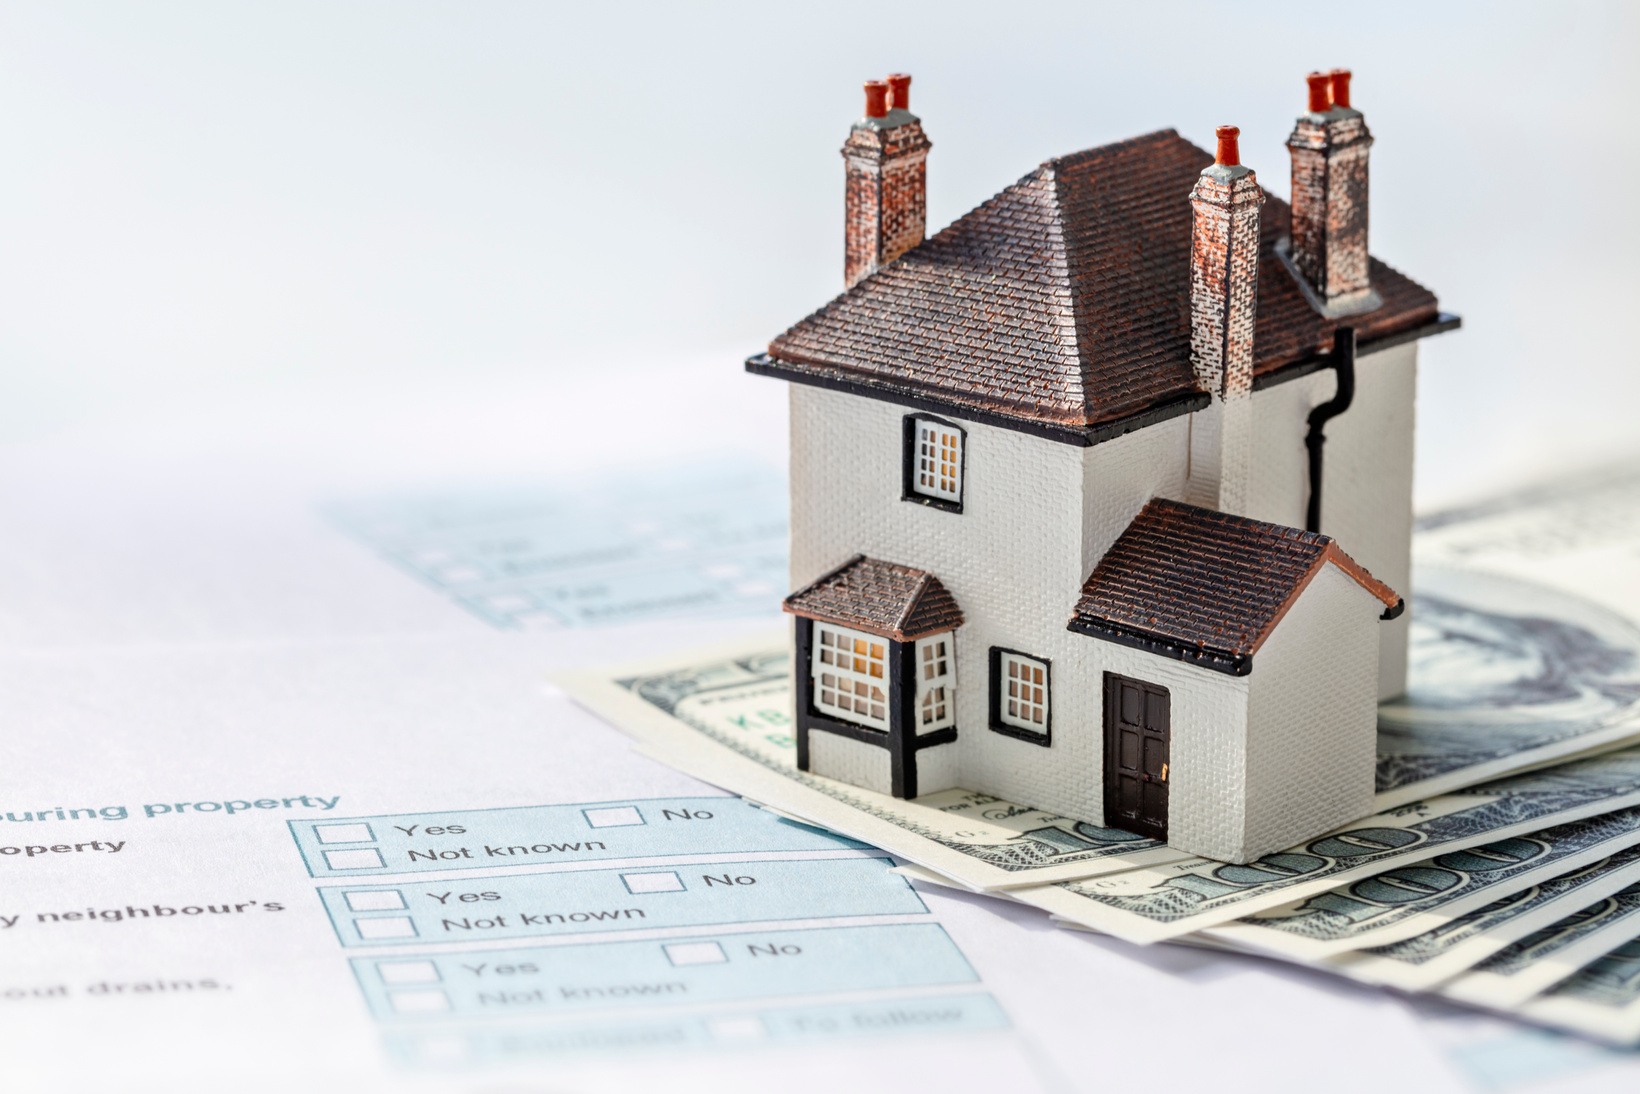 House on money, mortgage or property real estate tax